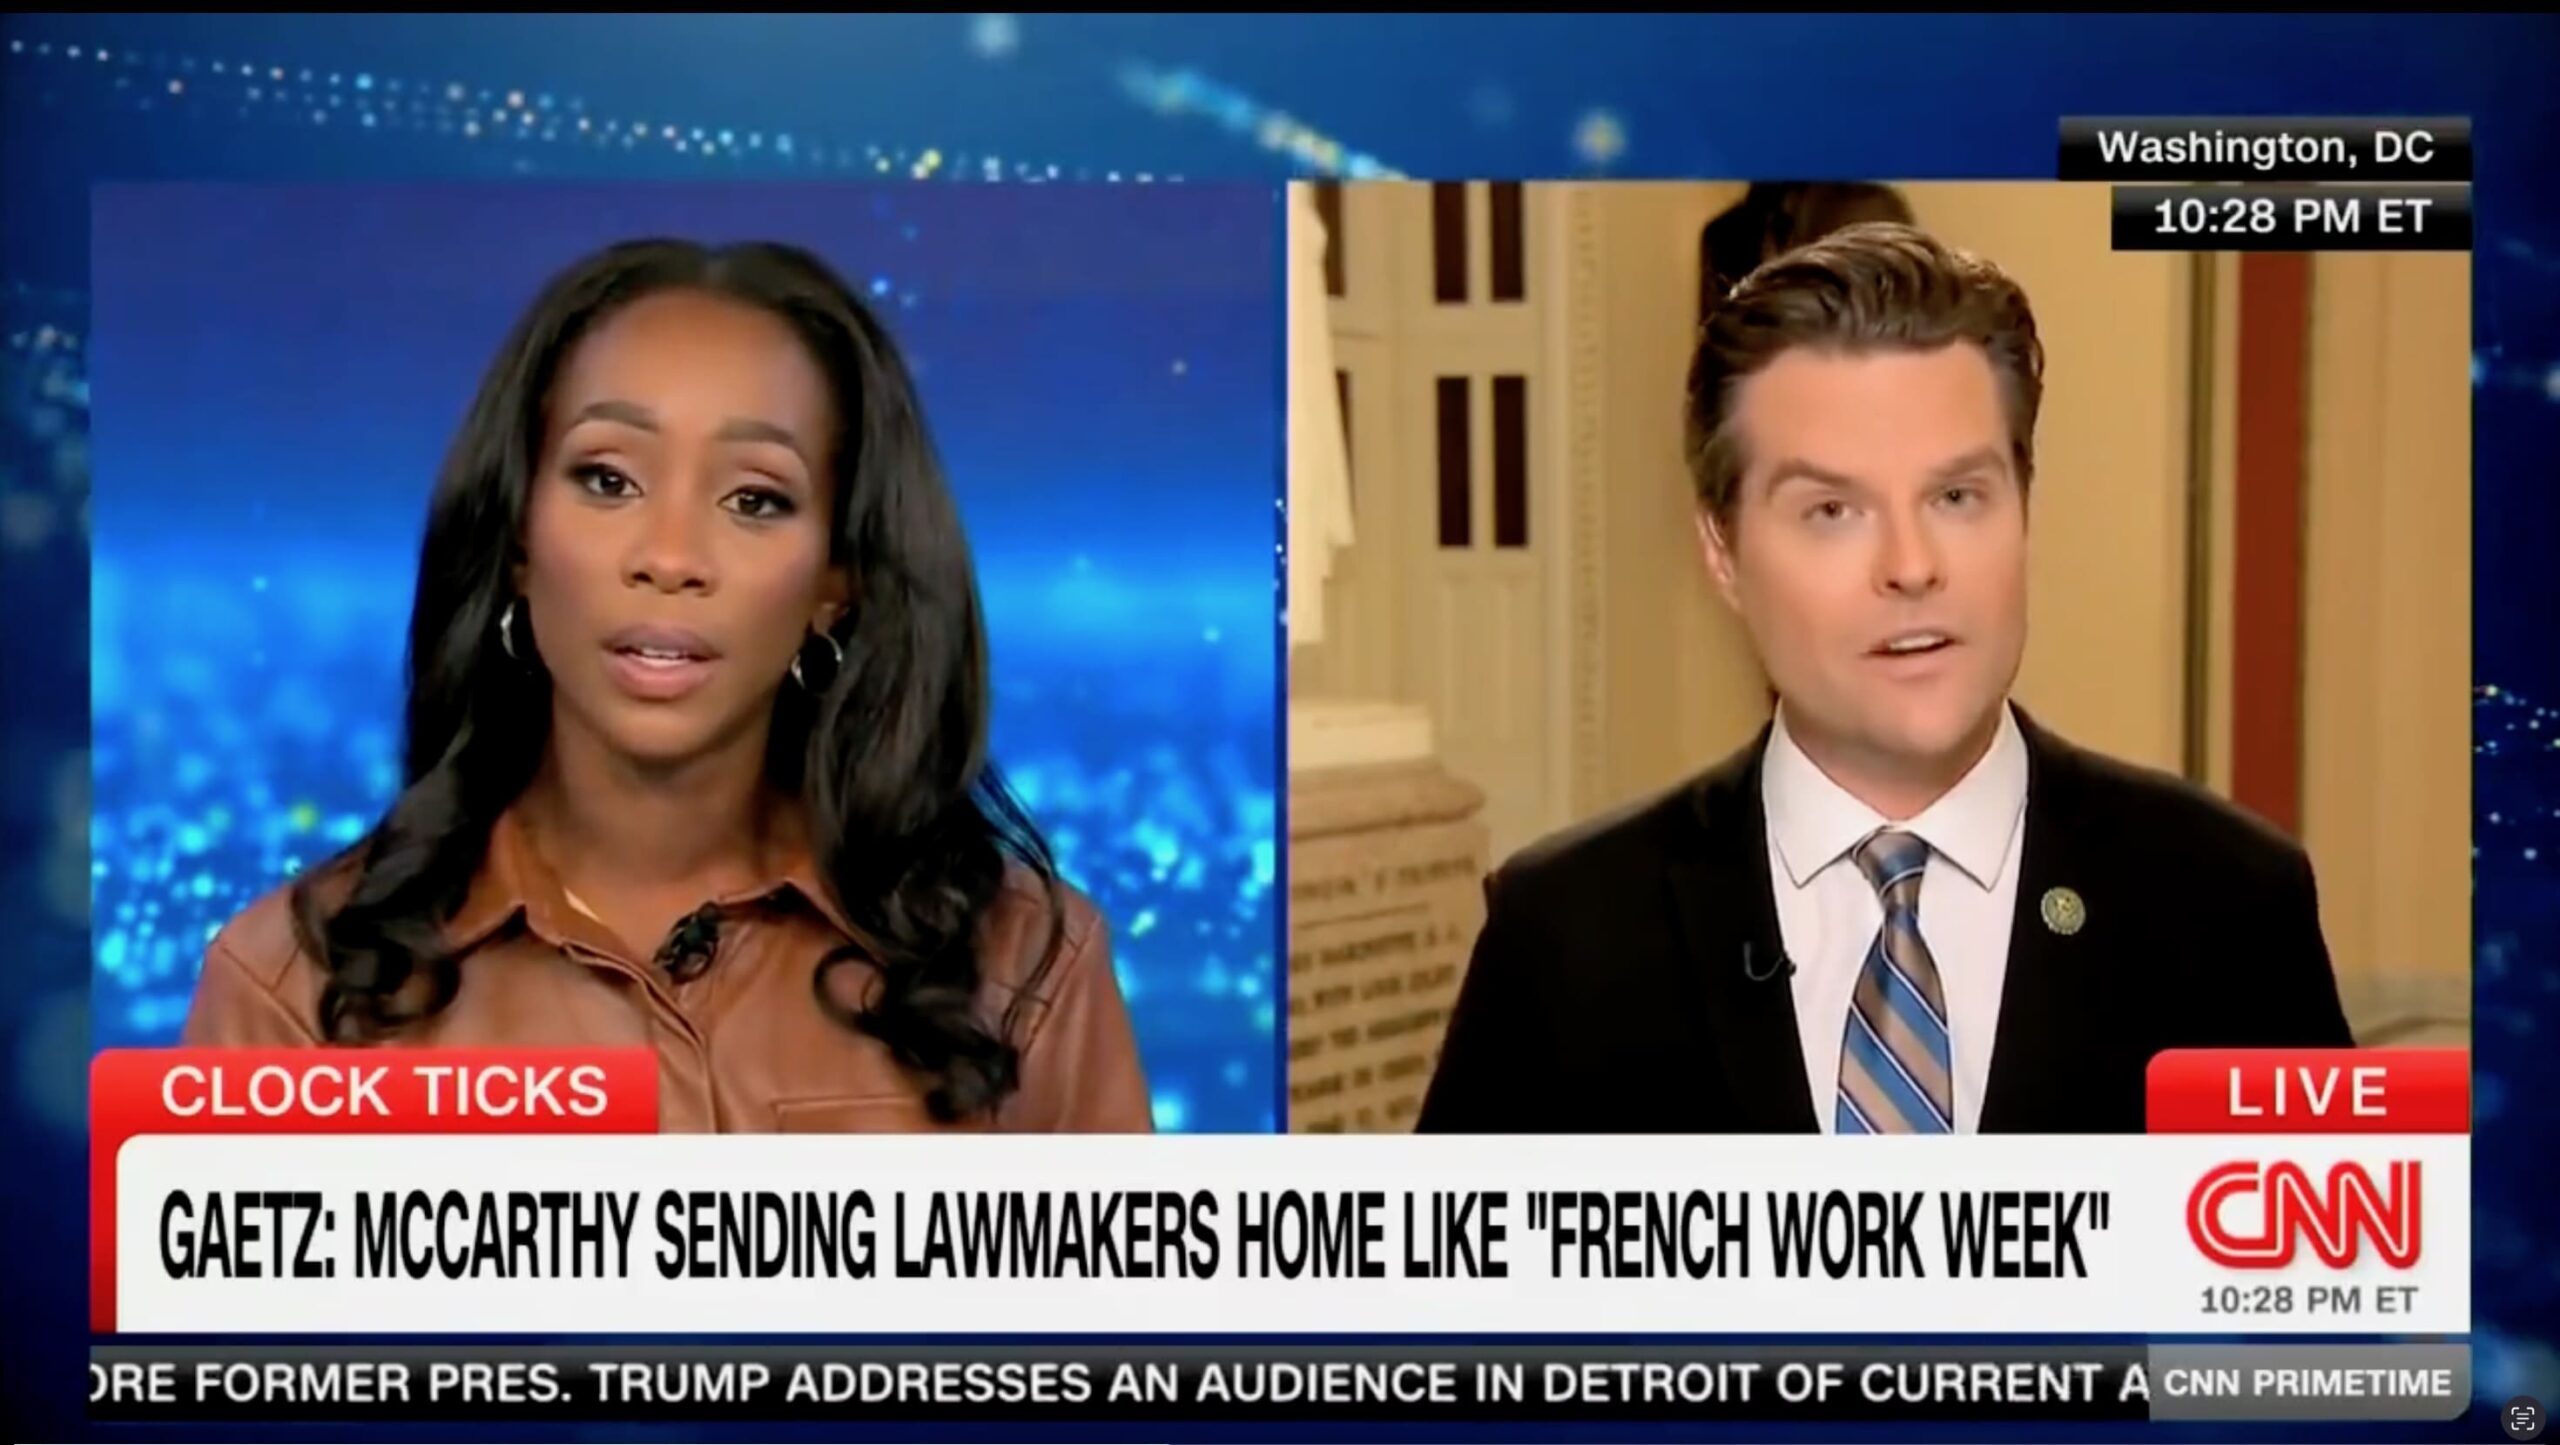 WATCH: Matt Gaetz Humiliates Clueless CNN Anchor After She Gets a Fact Wrong While Trying to Ambush Him - Then She Ends the Interview | The Gateway Pundit | by Cullen Linebarger